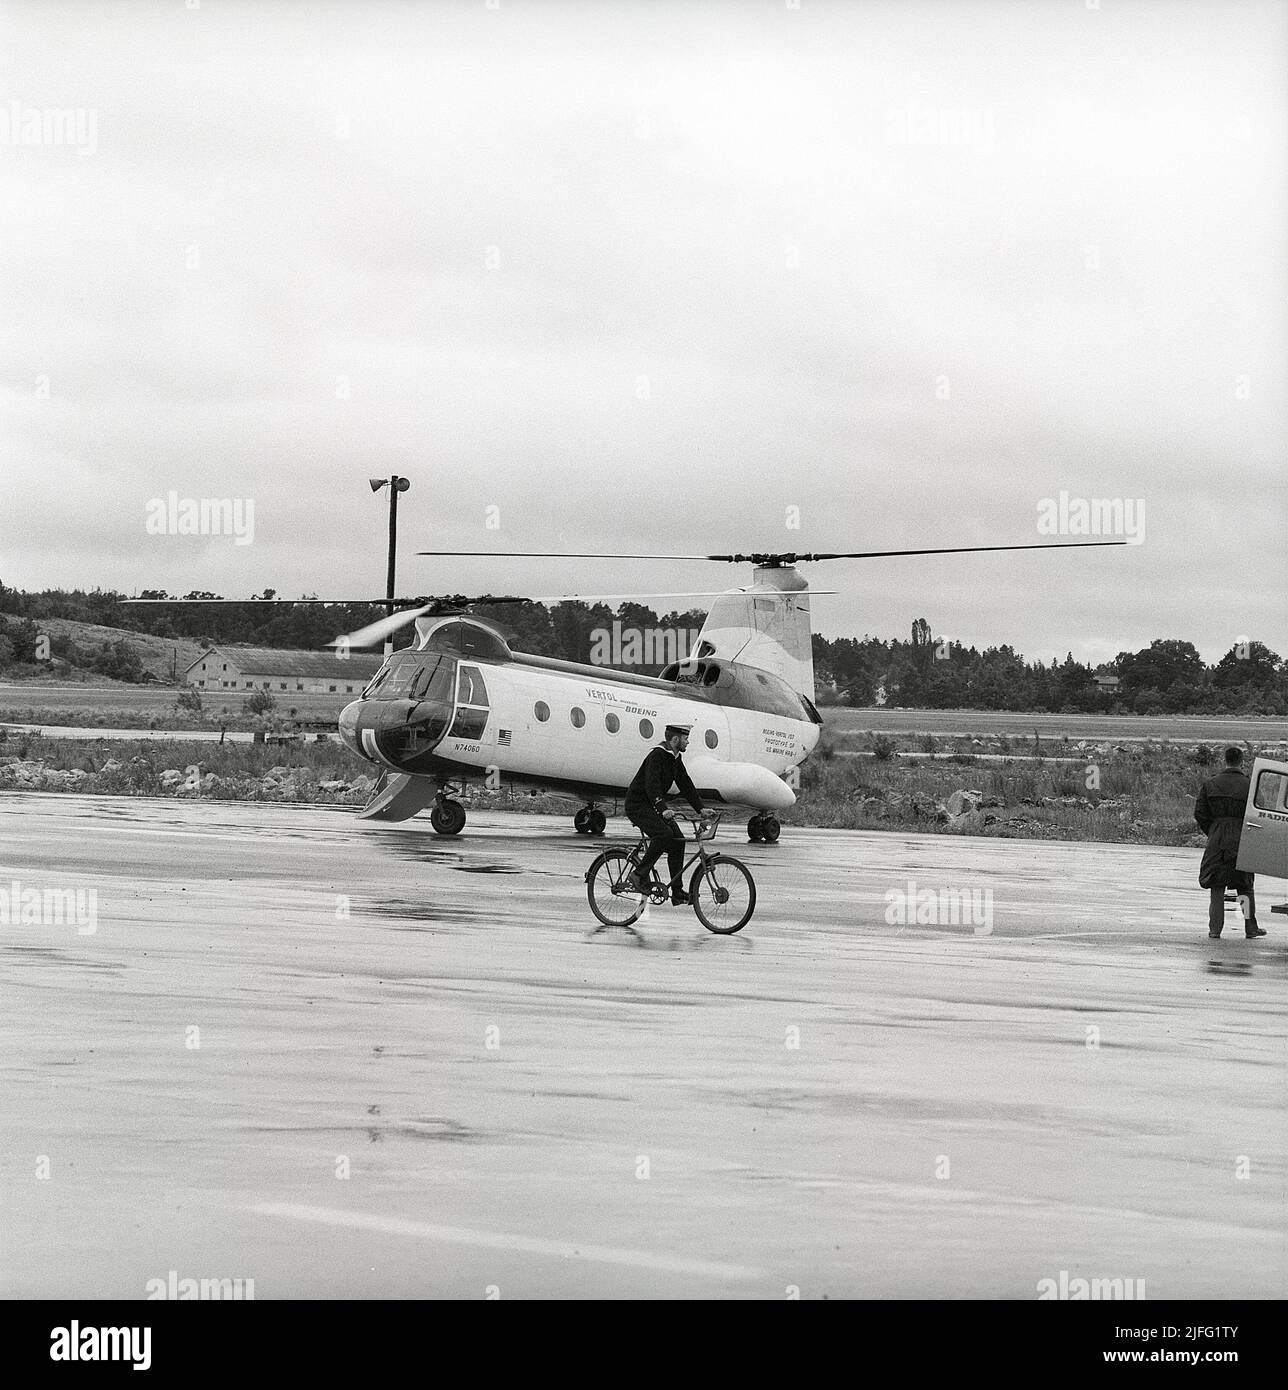 Helicopter history. The Boeing Vertol 107, also called Hkp 4. Helicopter developed by the american company Vertol that was fusioned with Boeing who began production of it 1956. The US Armed Forces started using it under the name CH-46 Sea Knight. The swedish military acquired 22 units of the helicopter with first delivery 1963 when the picture is taken. They were usad primary for submarine search and hunt.  Sweden 1963. ref Kristoffersson CU26-1 CU26,27,28 Stock Photo